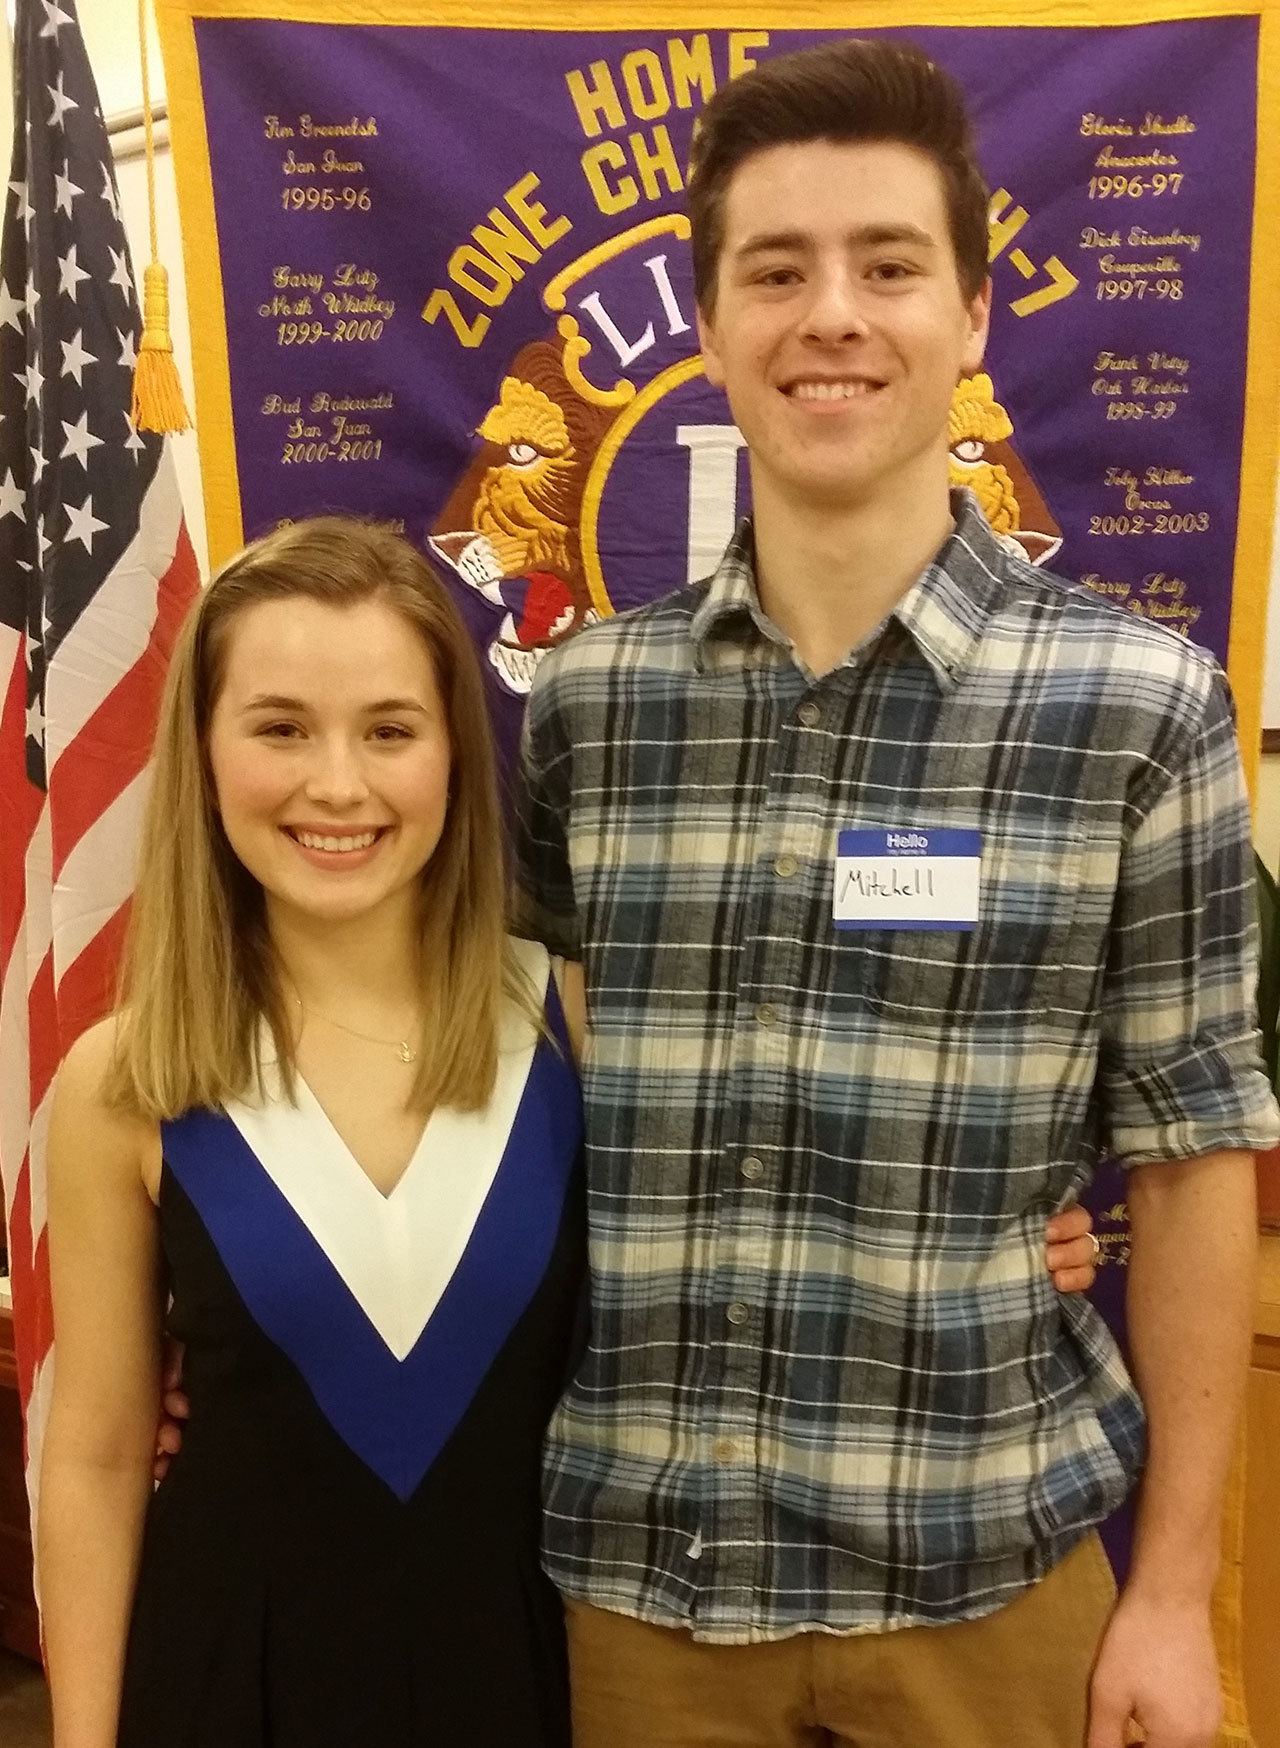 Coupeville High School seniors Valen Trujillo and Mitchell Carroll were chosen as Students of the Quarter by the Coupeville Lions Club. Photo provided